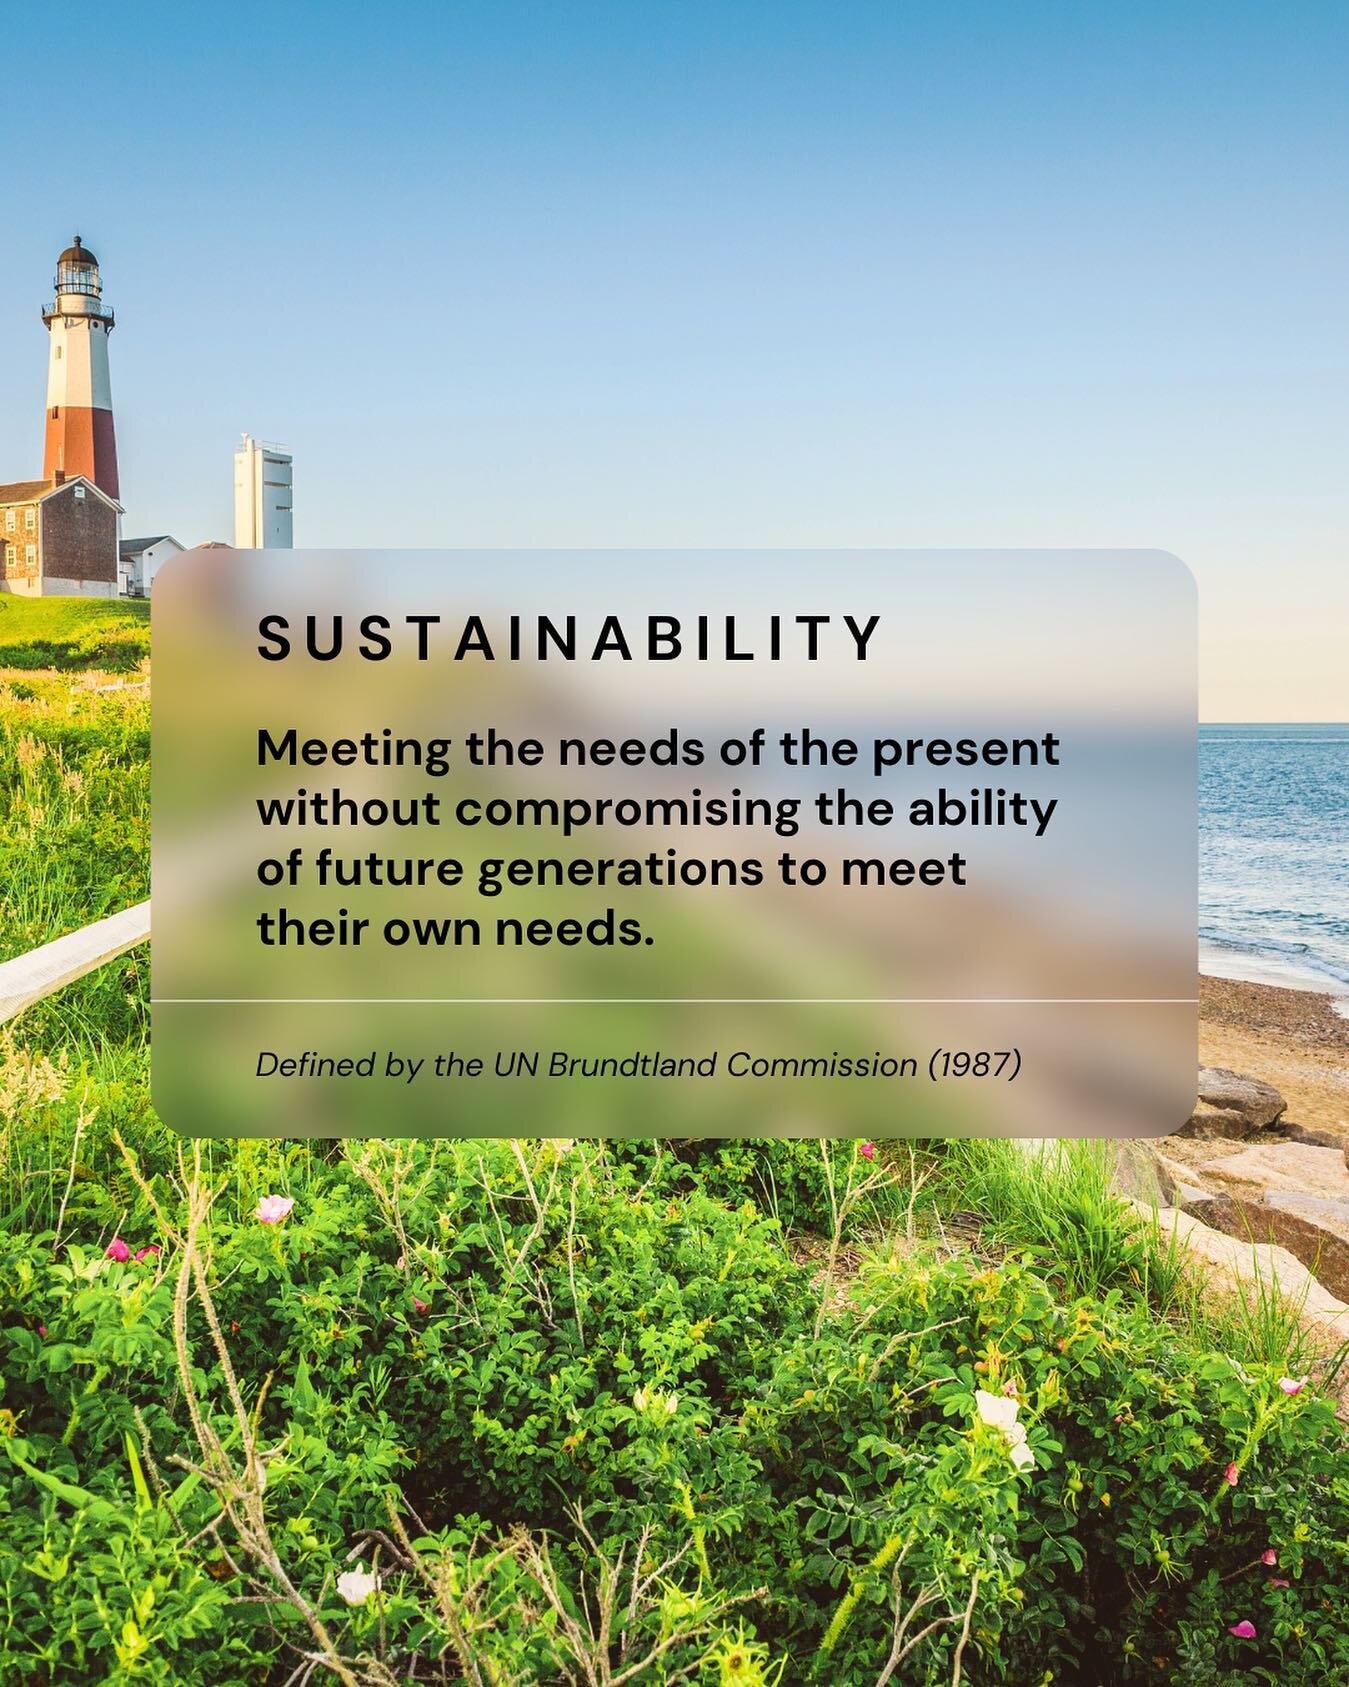 🤔 It's in our name, but what does it mean? We thought we'd share our favorite definition of &quot;sustainability!&quot;

As defined by the UN Brundtland Commission in 1987: Sustainability is meeting the needs of the present without compromising the 